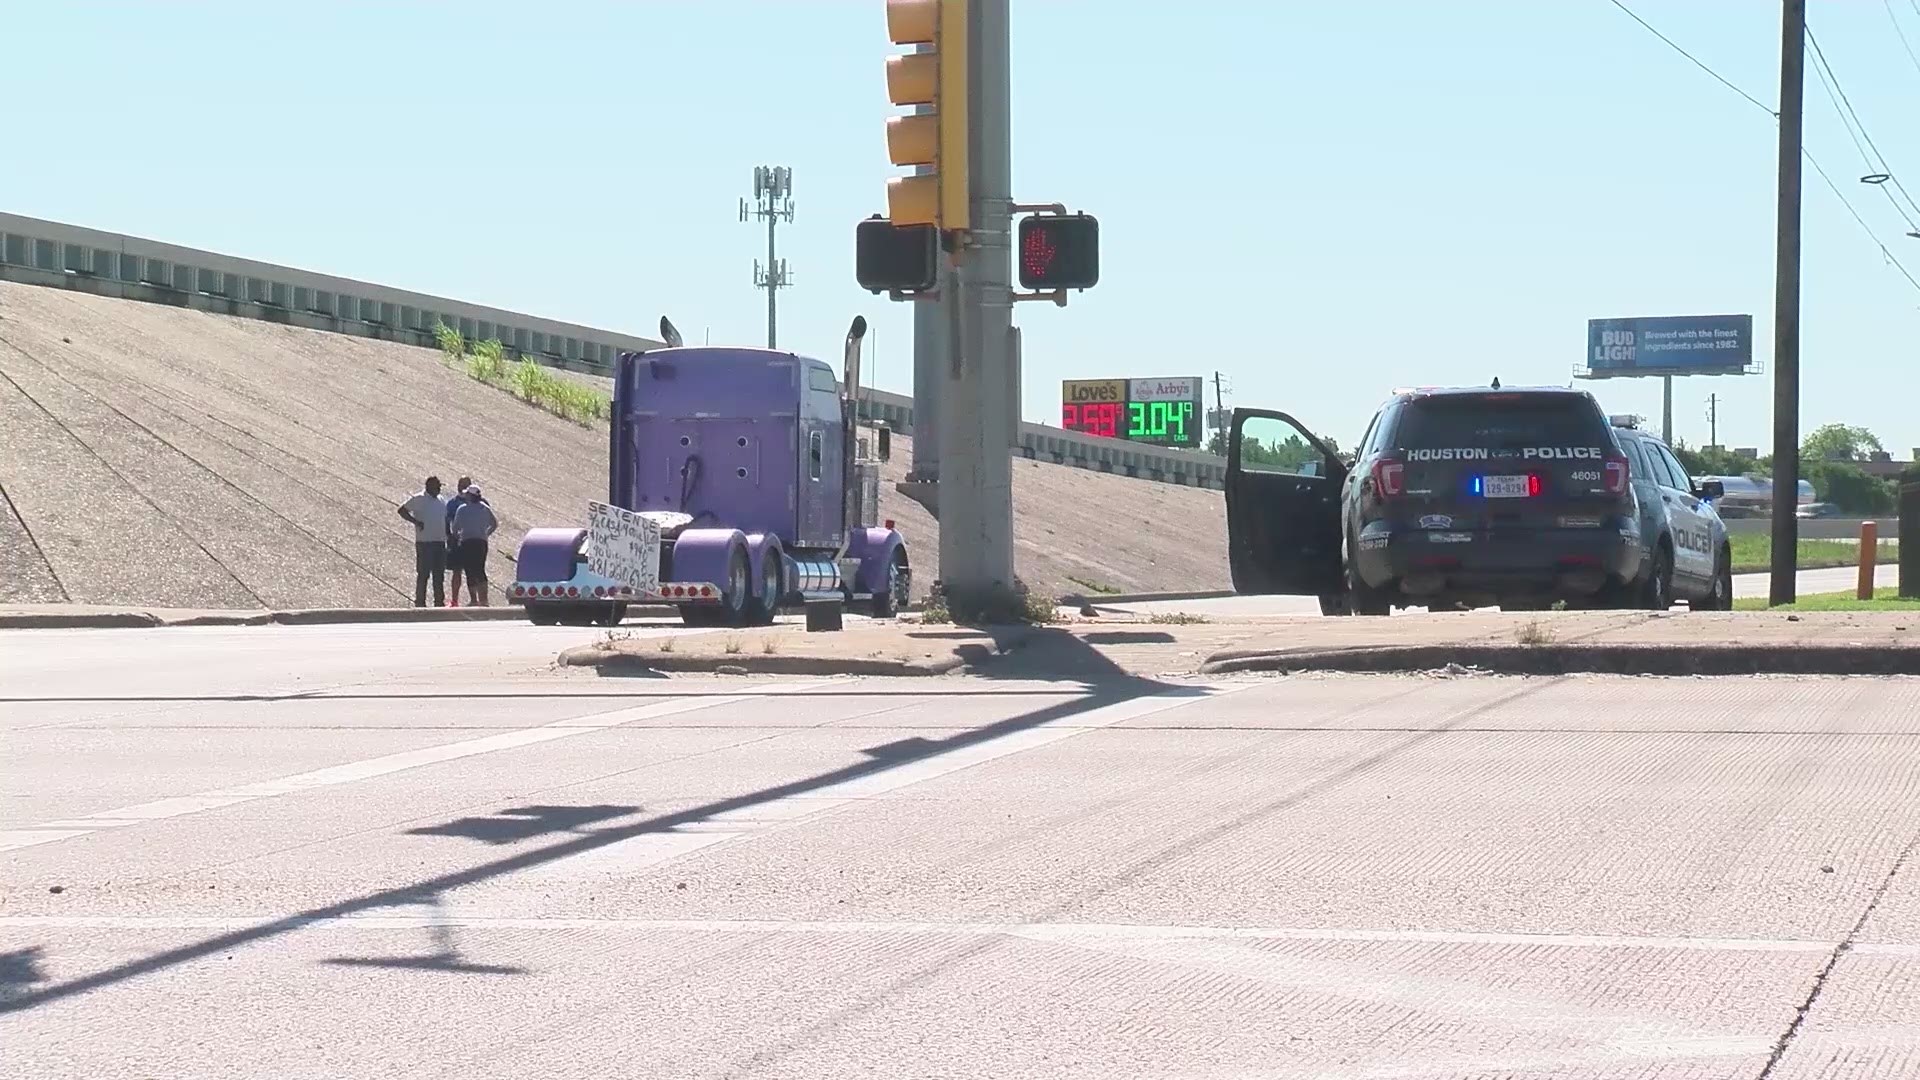 A woman died after she hit by an 18-wheeler while she was crossing the street. Police said the woman wasn't walking in a crosswalk area and therefore failed to yield the right of way to the truck.